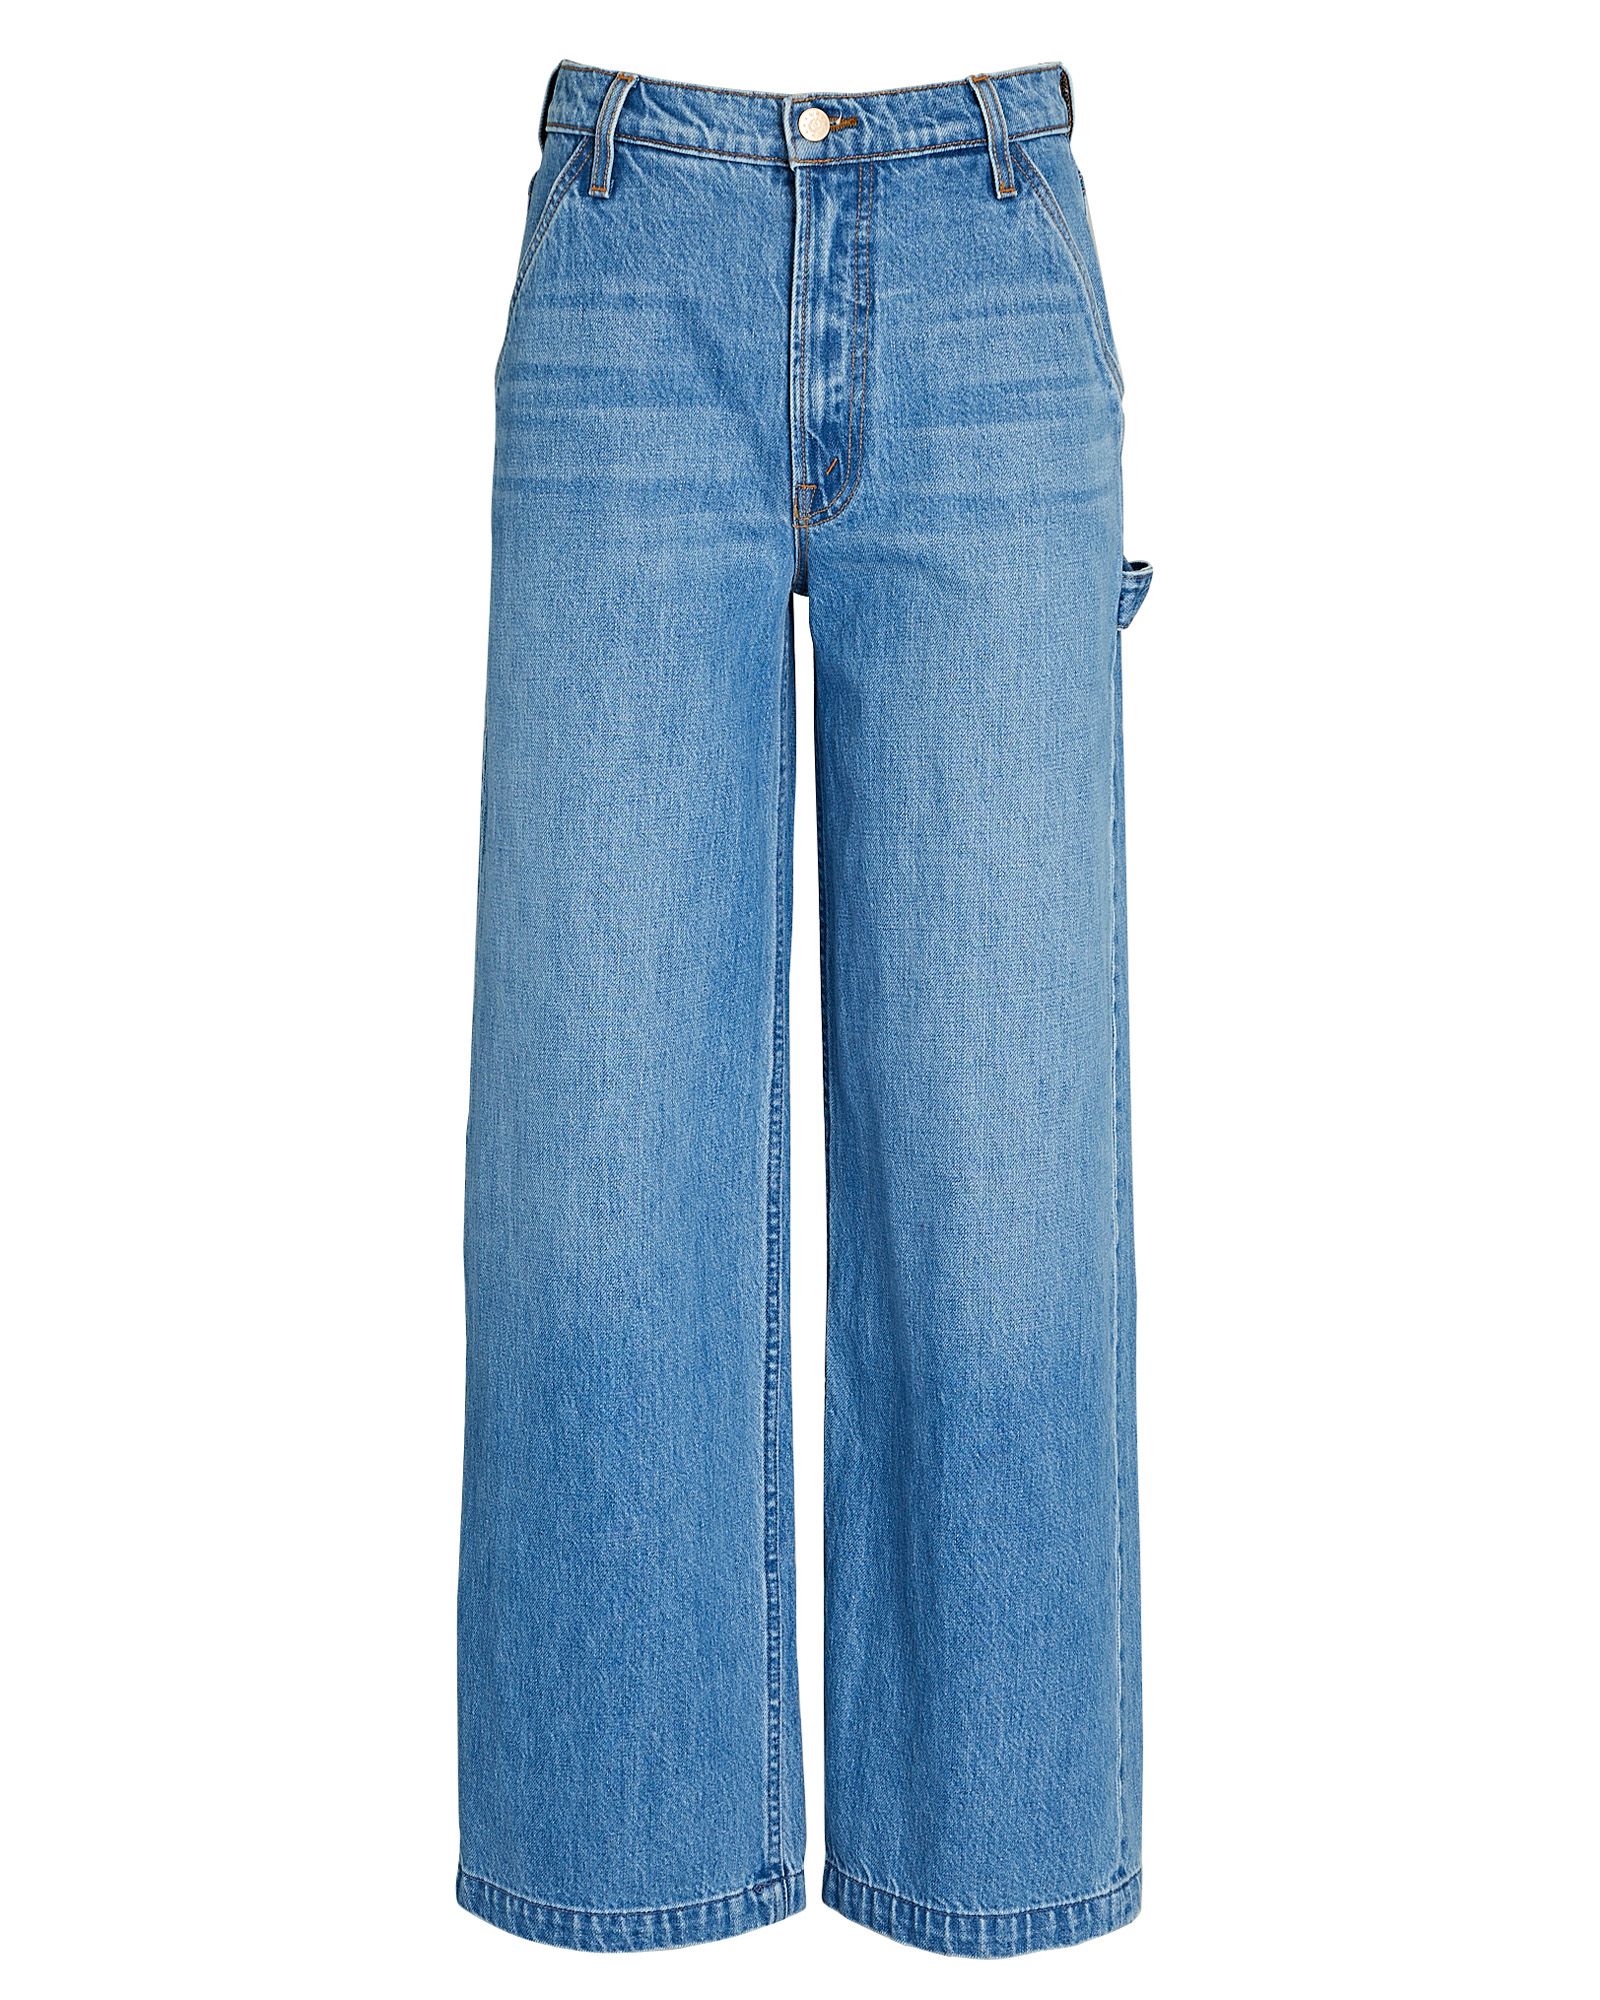 MOTHER x SNACKS! The Fun Dip Utility Puddle Jeans, Nothing Else Like It 26 | INTERMIX